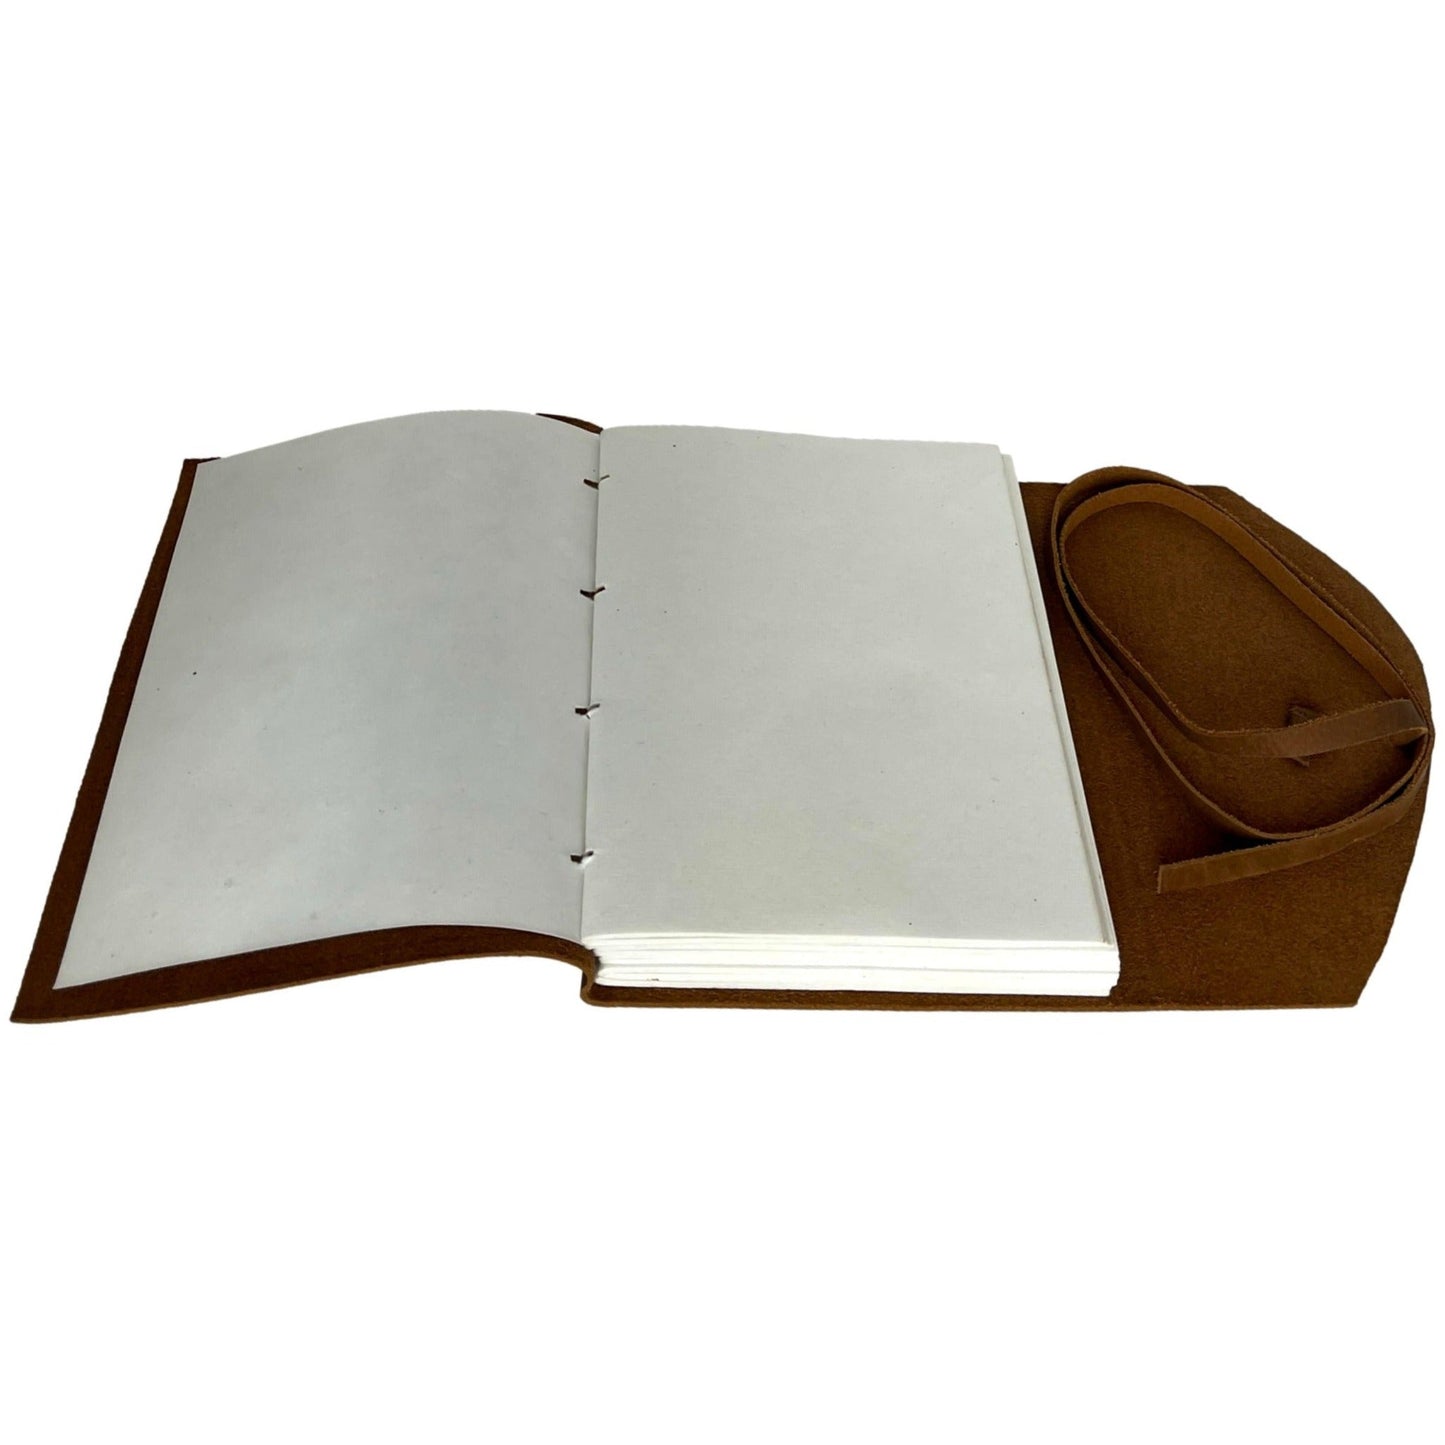 100% Leather Journal with Strap Closure and Handmade Paper